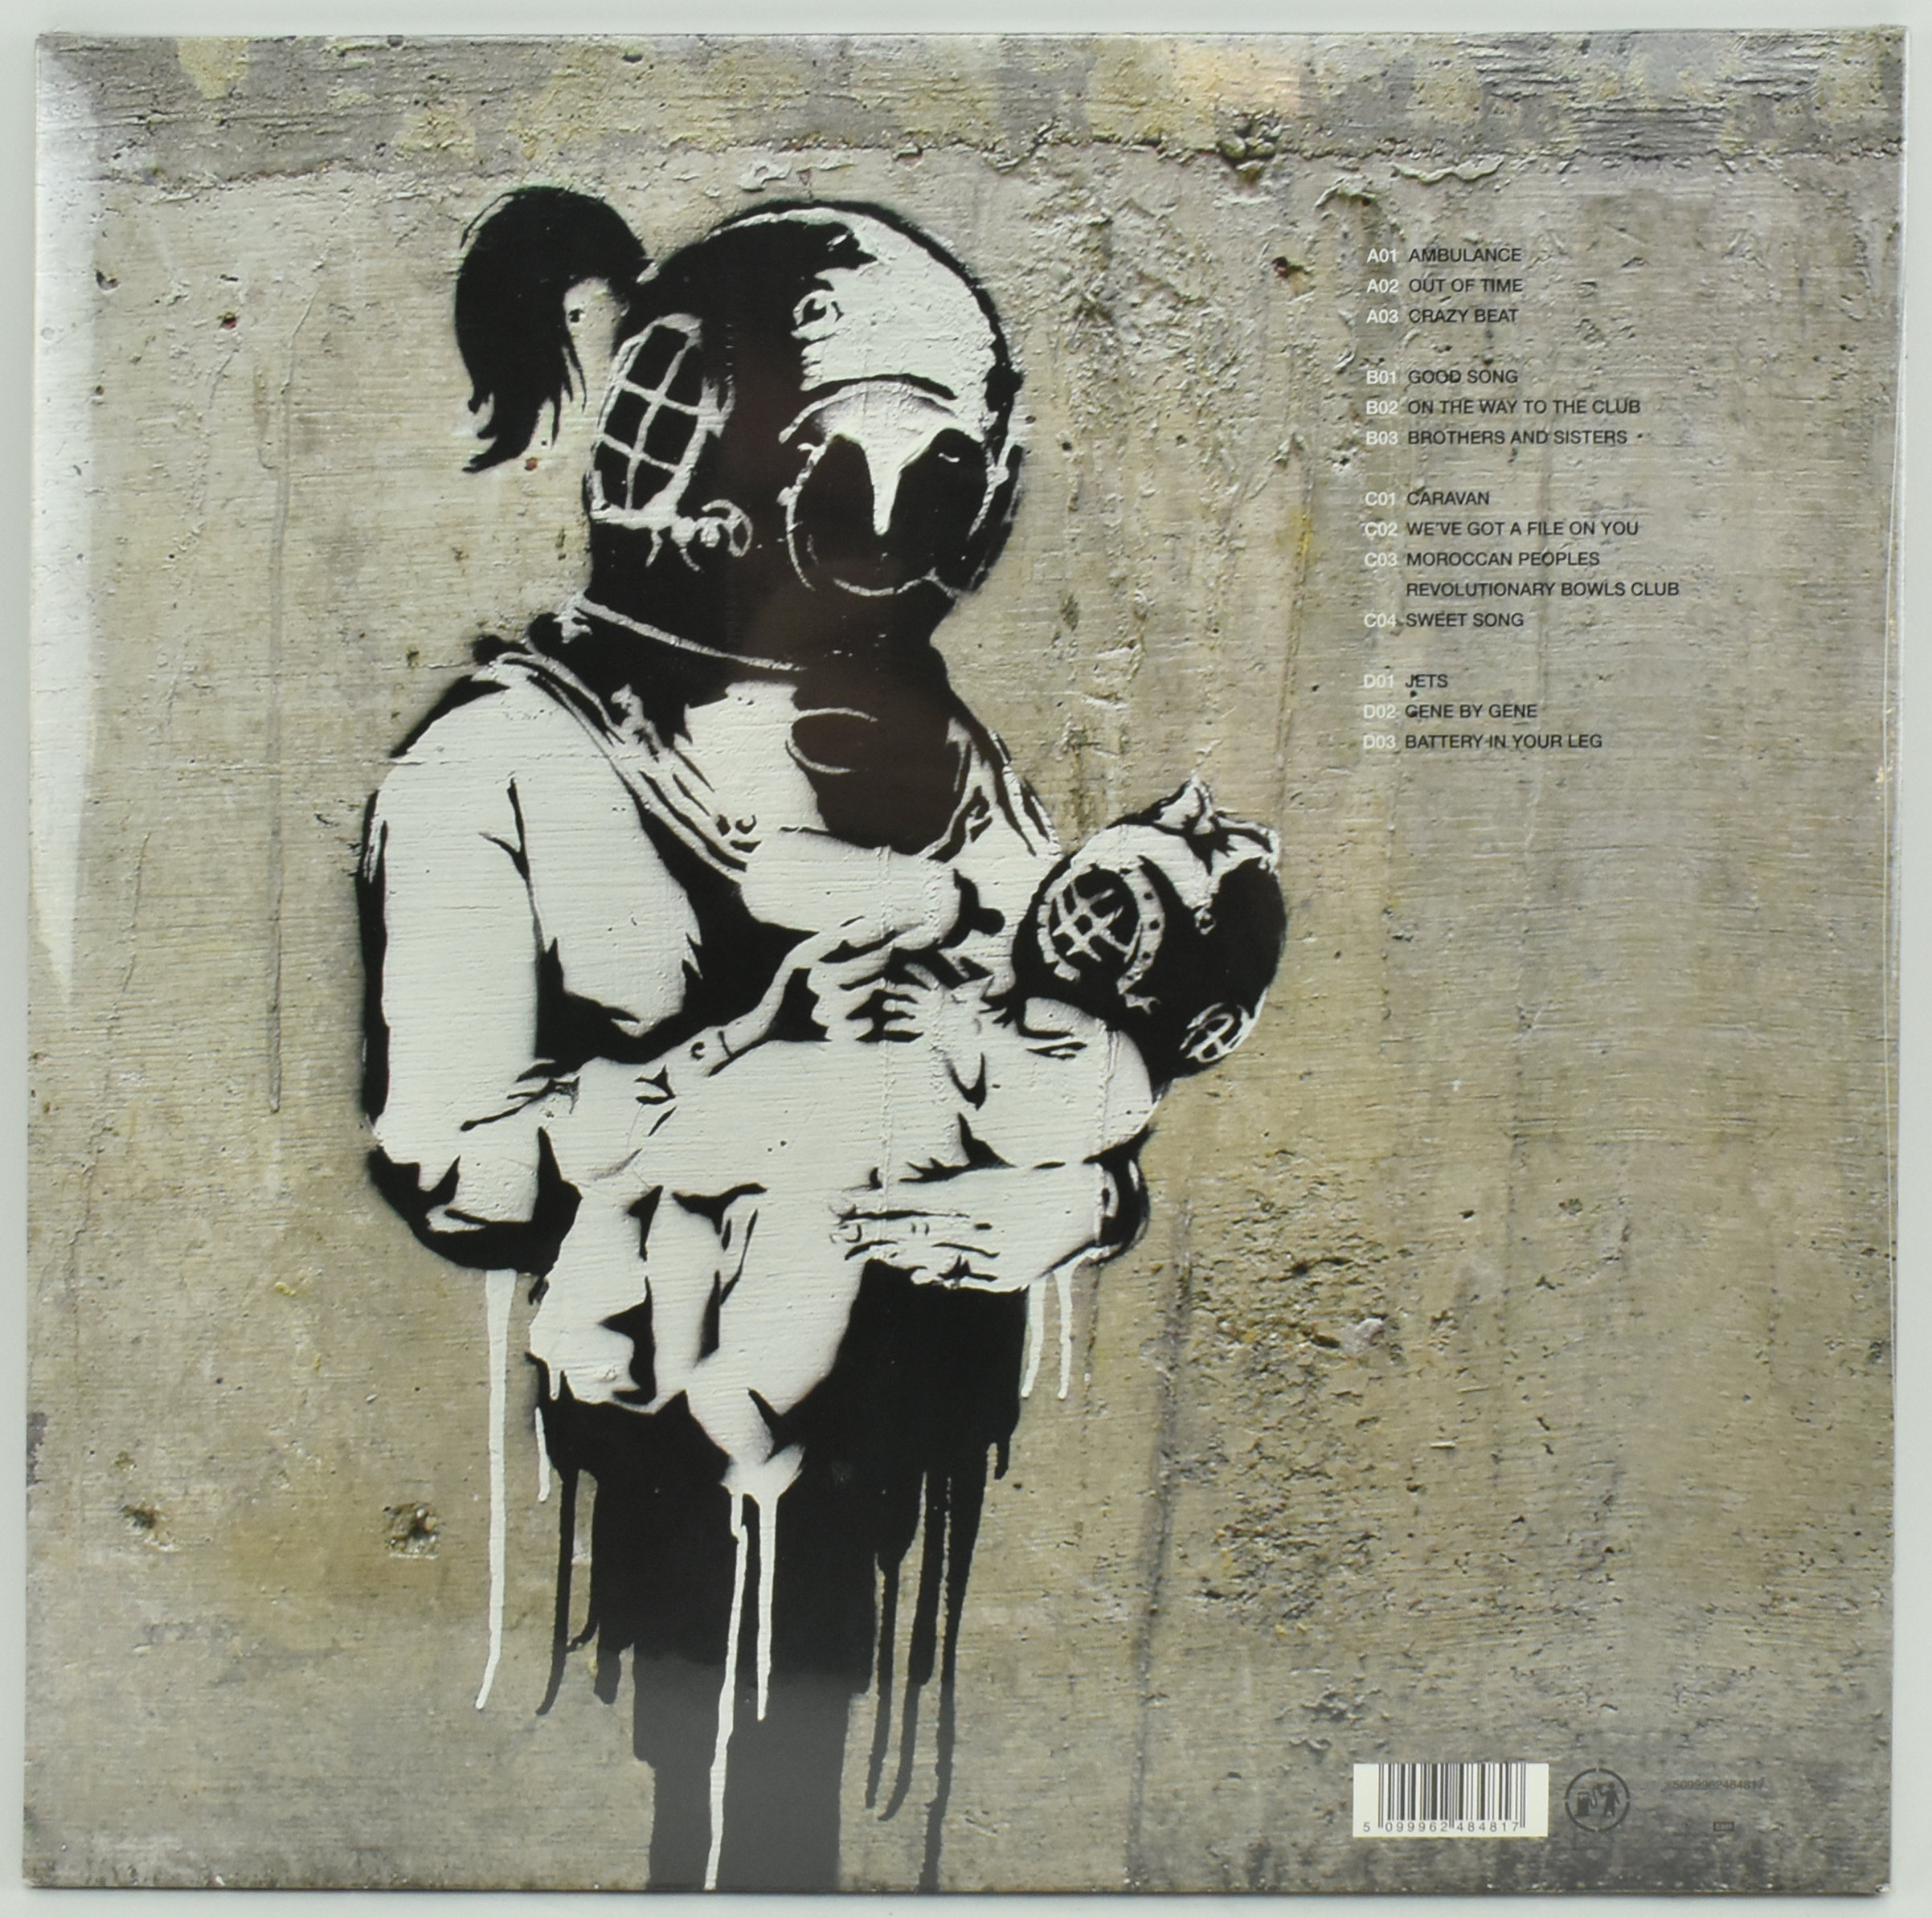 BLUR - THINK TANK, 2003 - RE-ISSUE - COVER ART WORK BY BANKSY - Image 3 of 3